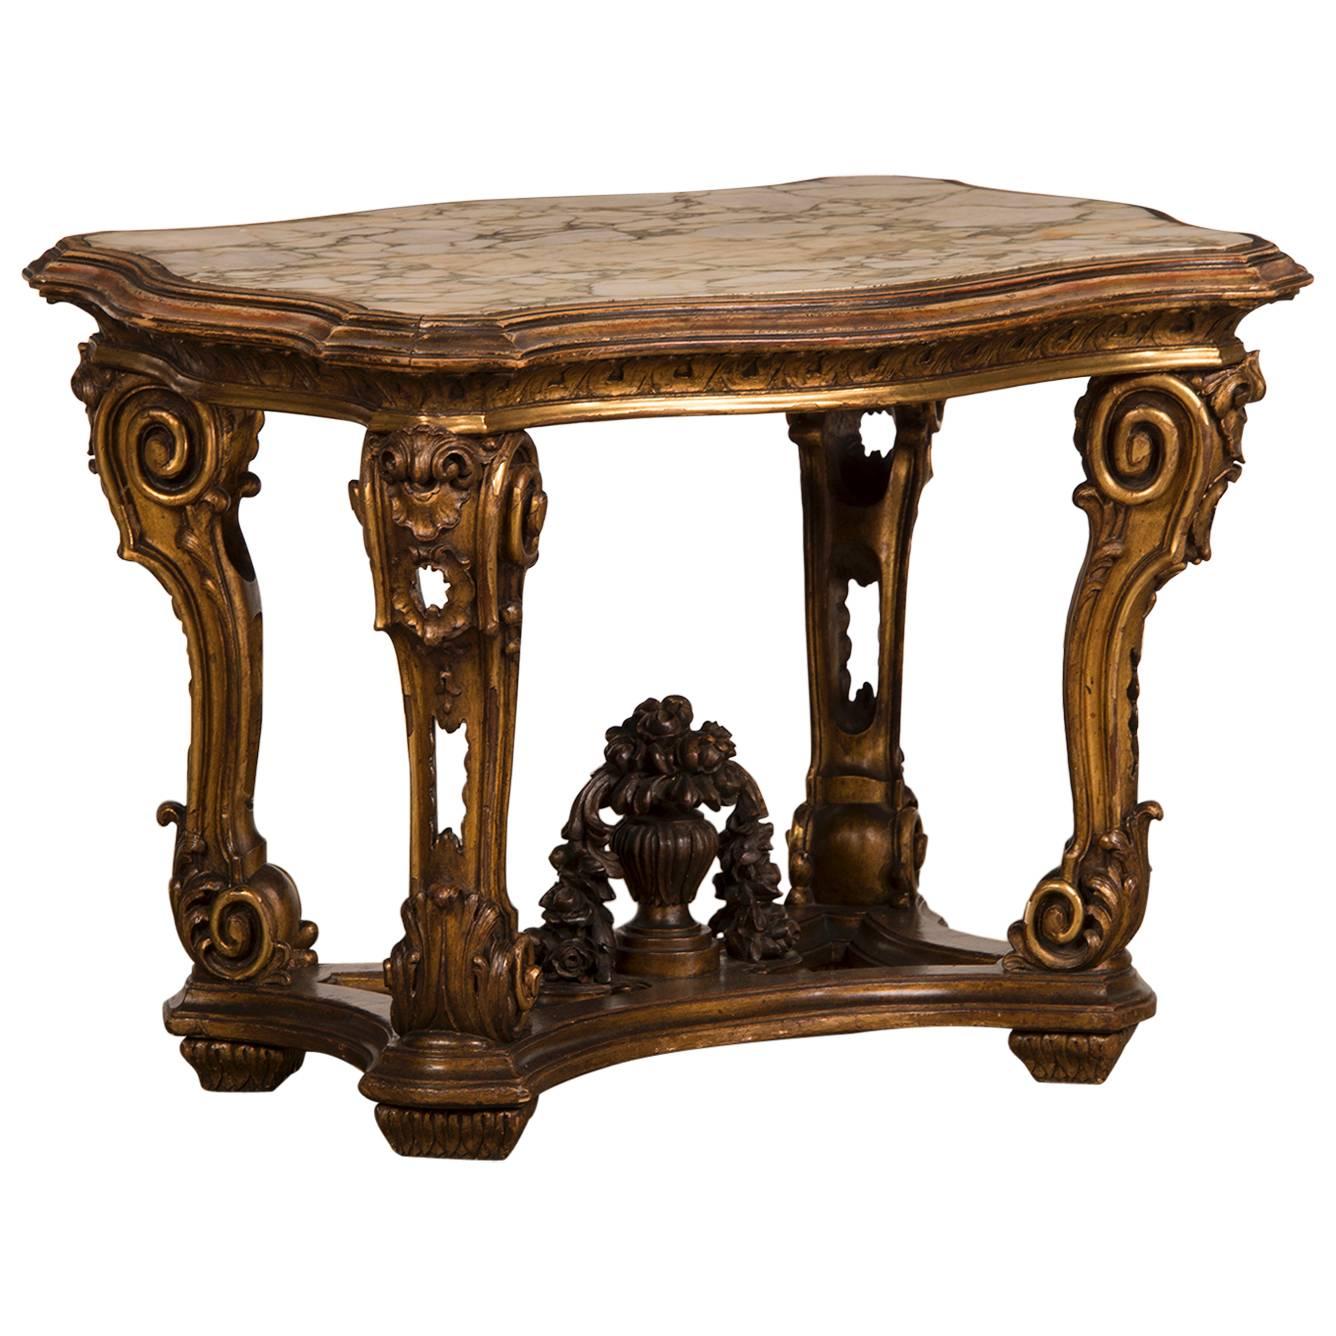 Antique Italian Gilded Wood Table from the Belle Epoque Period, circa 1890